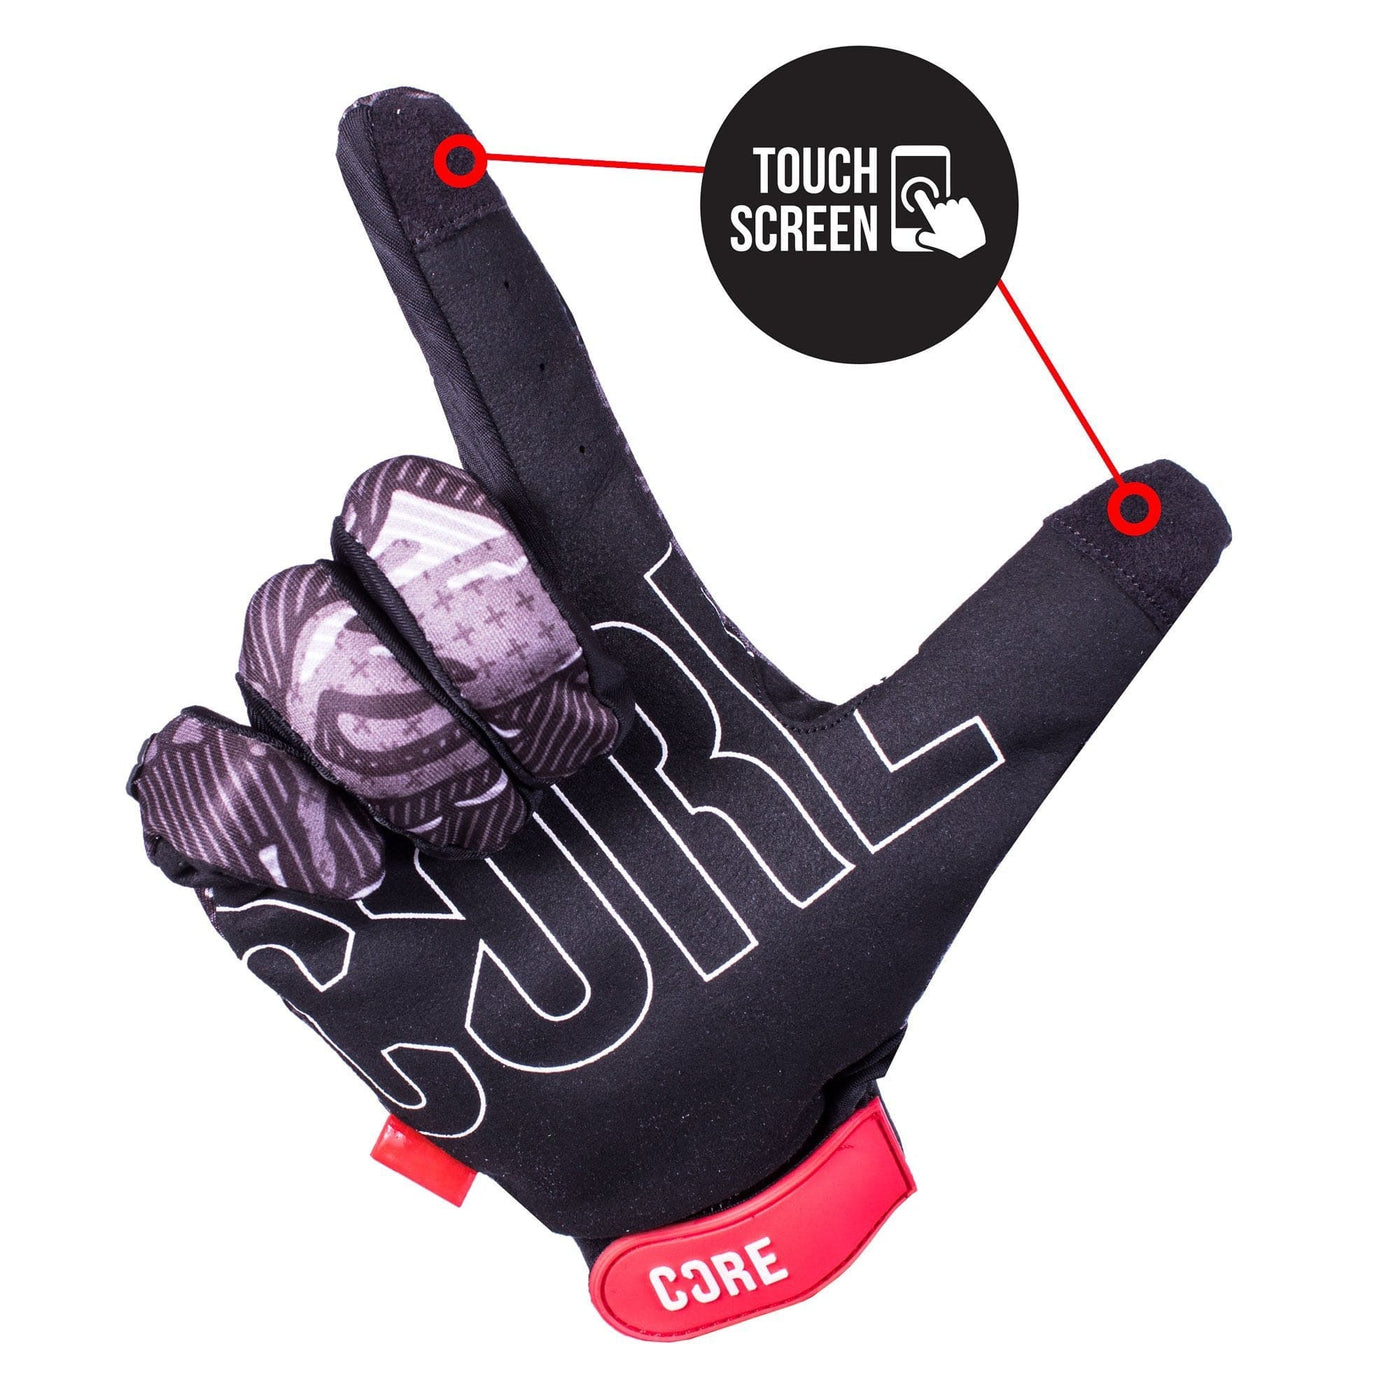 CORE Protection BMX Gloves Black Camo I Bike Gloves Touch Screen